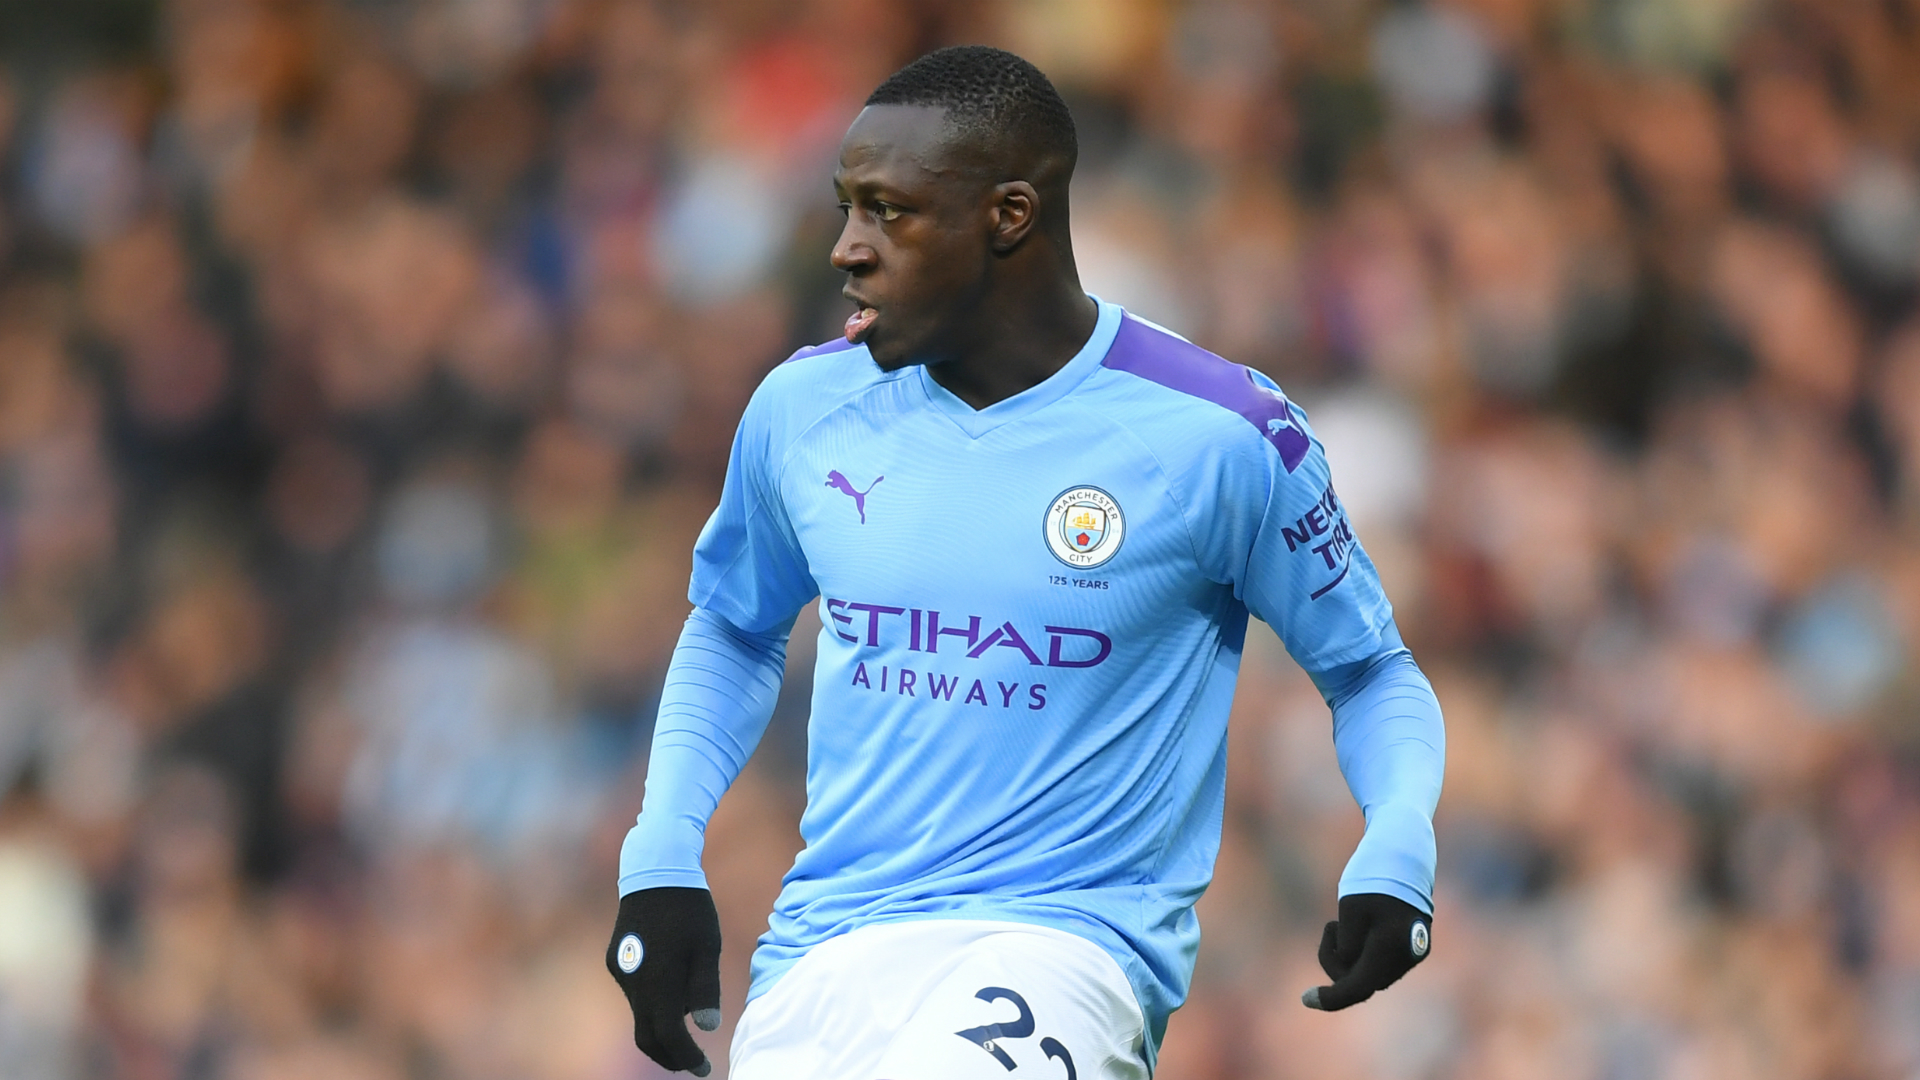 Benjamin Mendy faces additional rape charges